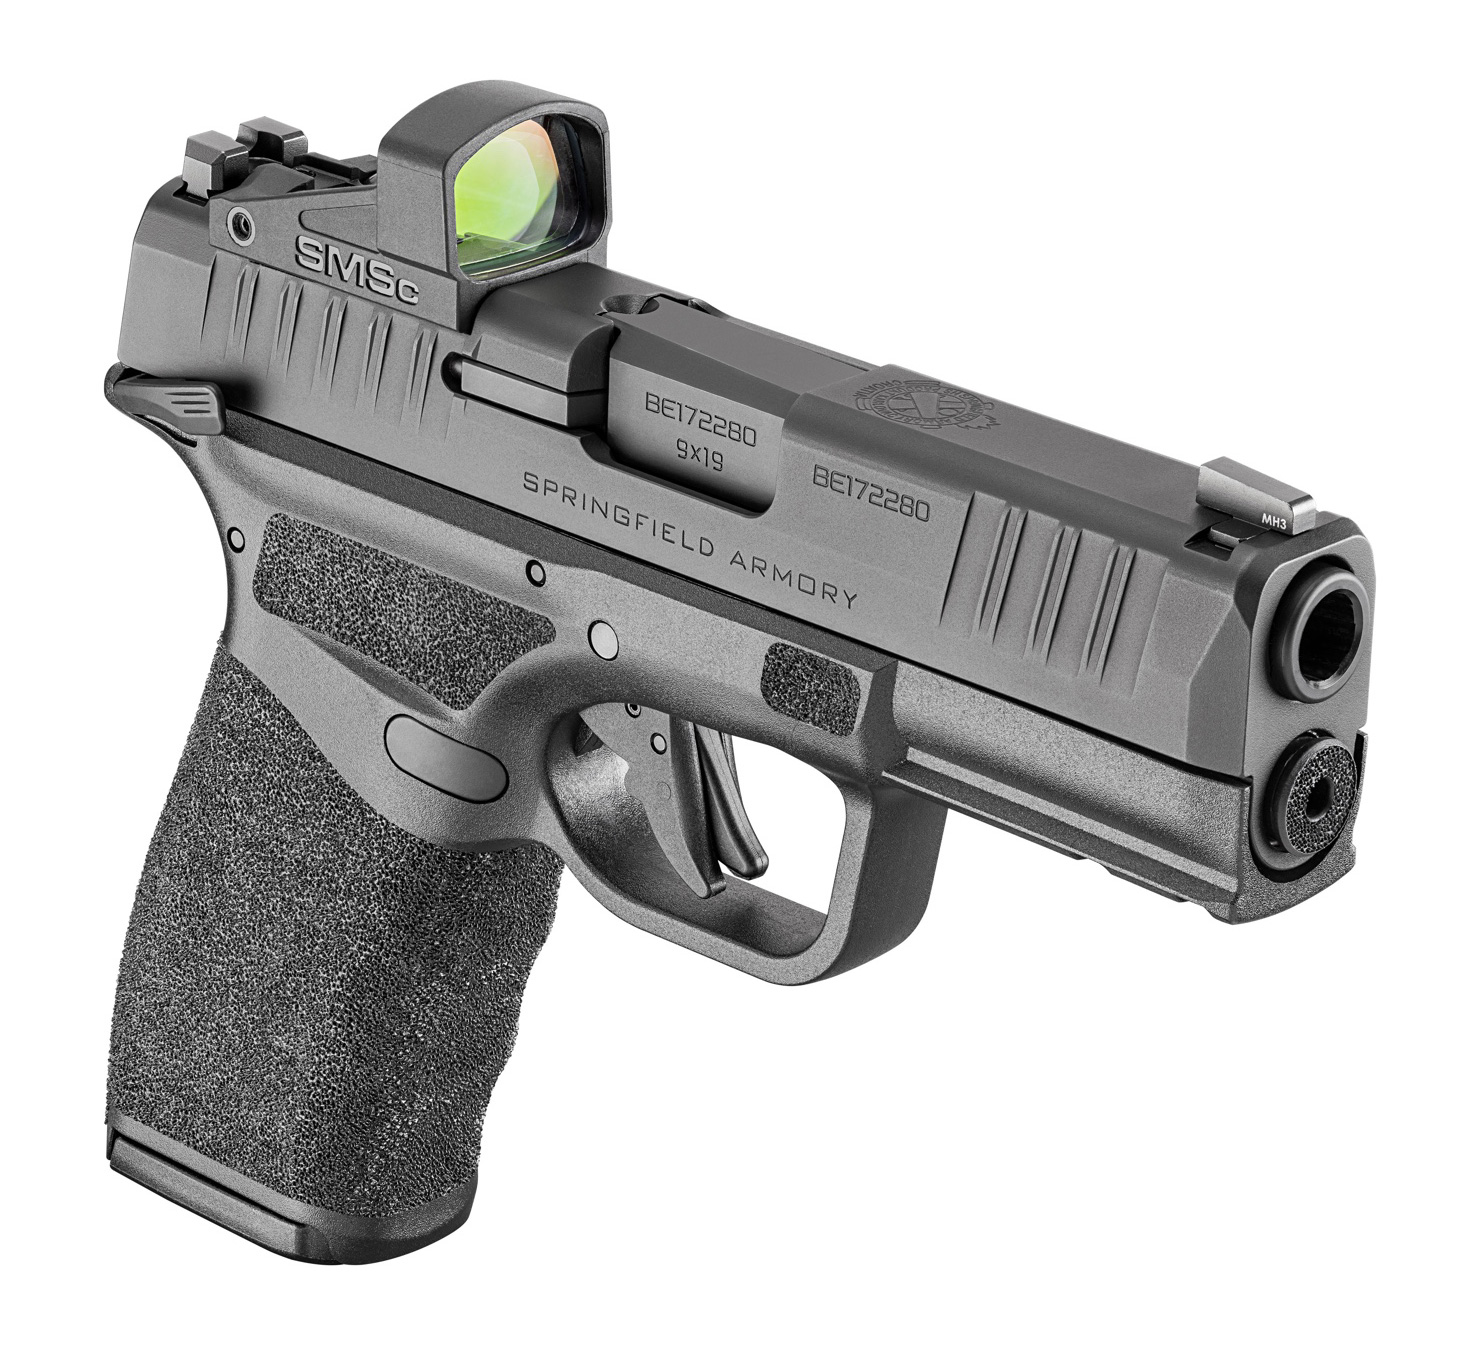 Shooters who like the thumb safety are not relegated to a basic model only. Springfield Armory offers the Hellcat Pro with SMSc sight in addition to the thumb safety.